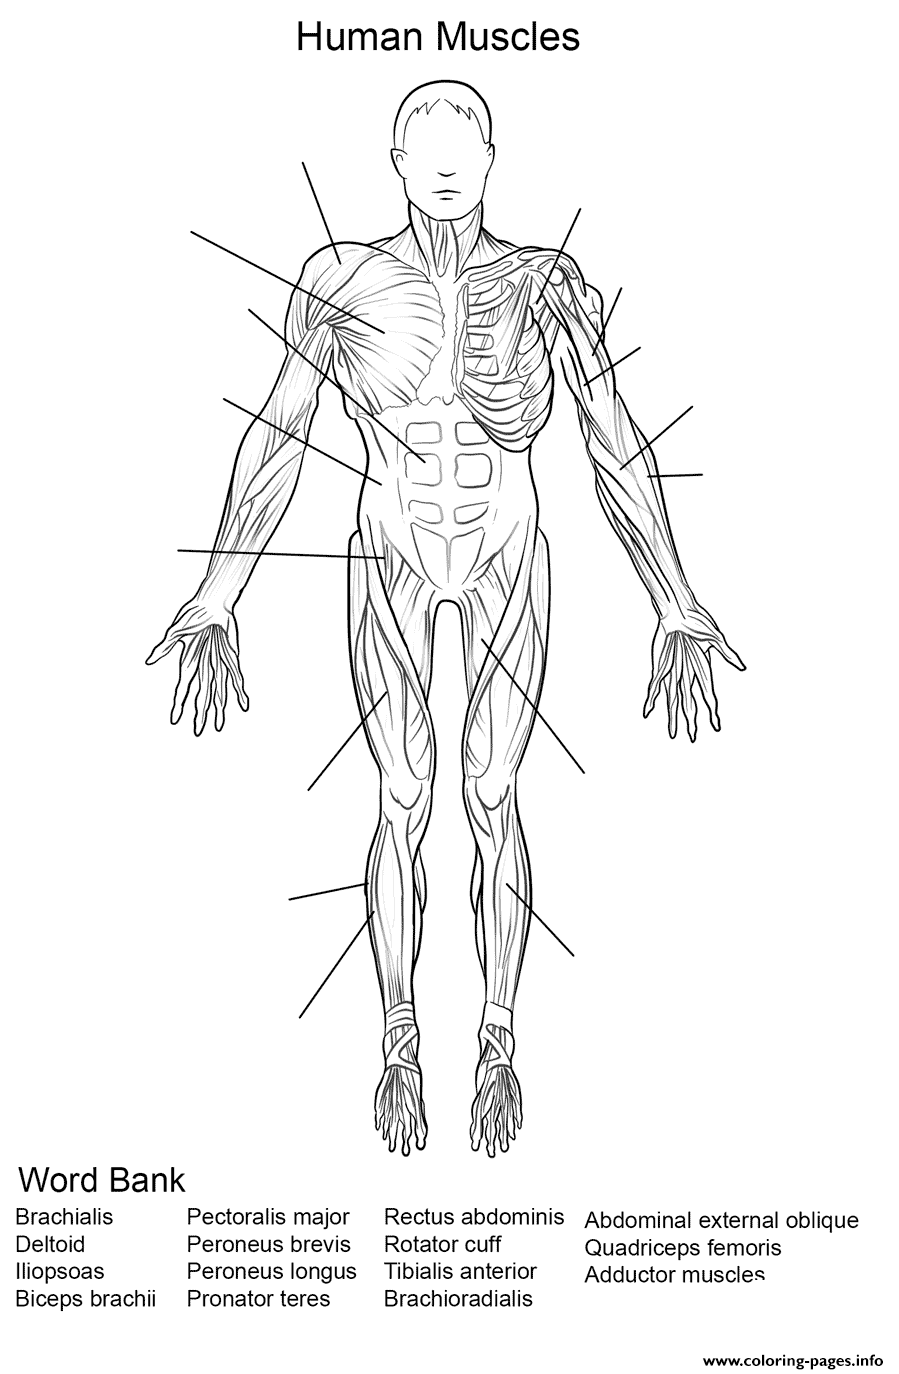 Human Muscles Front View Worksheet coloring